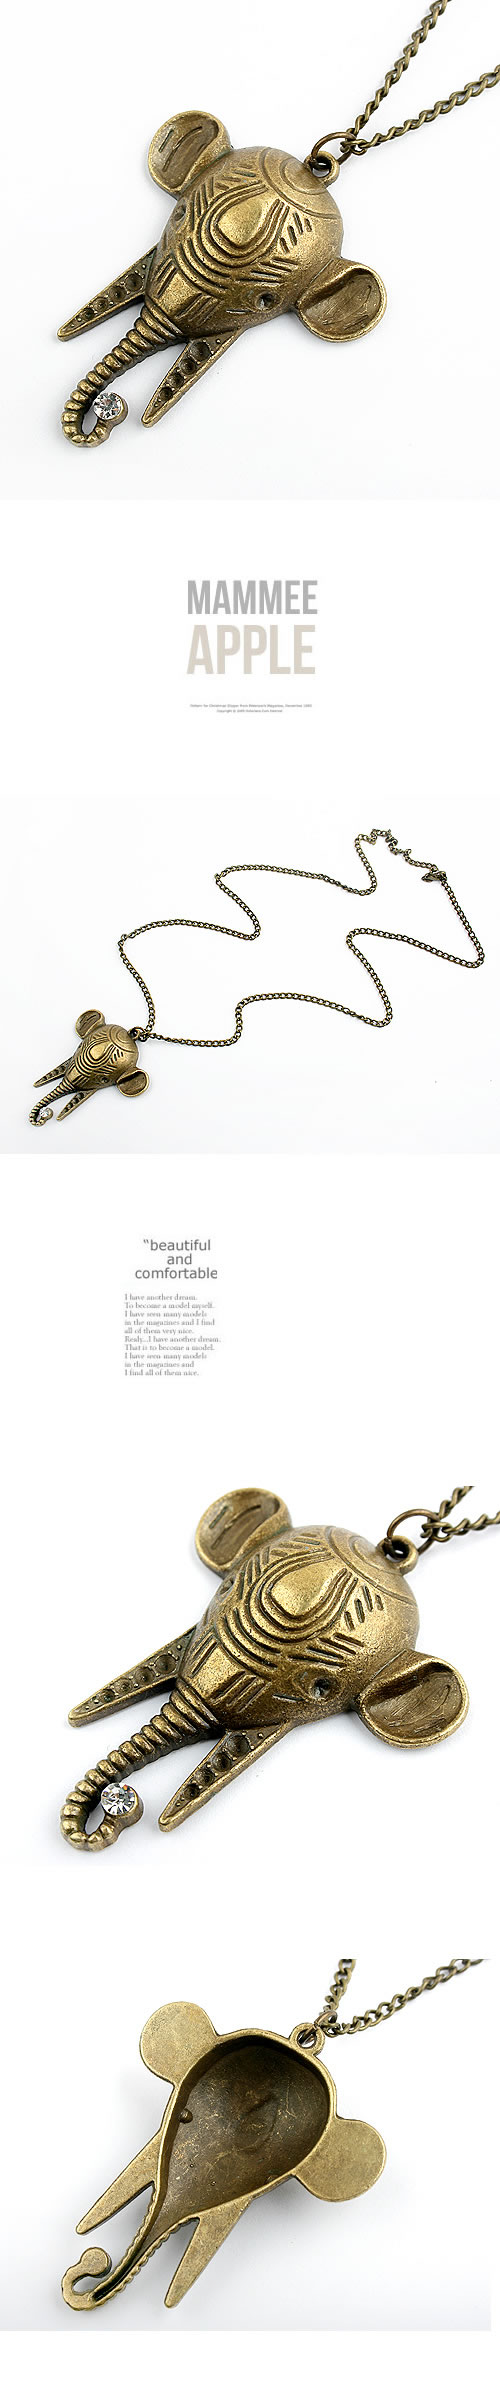 Upper Bronze Elephone Head Alloy Chains,Chains